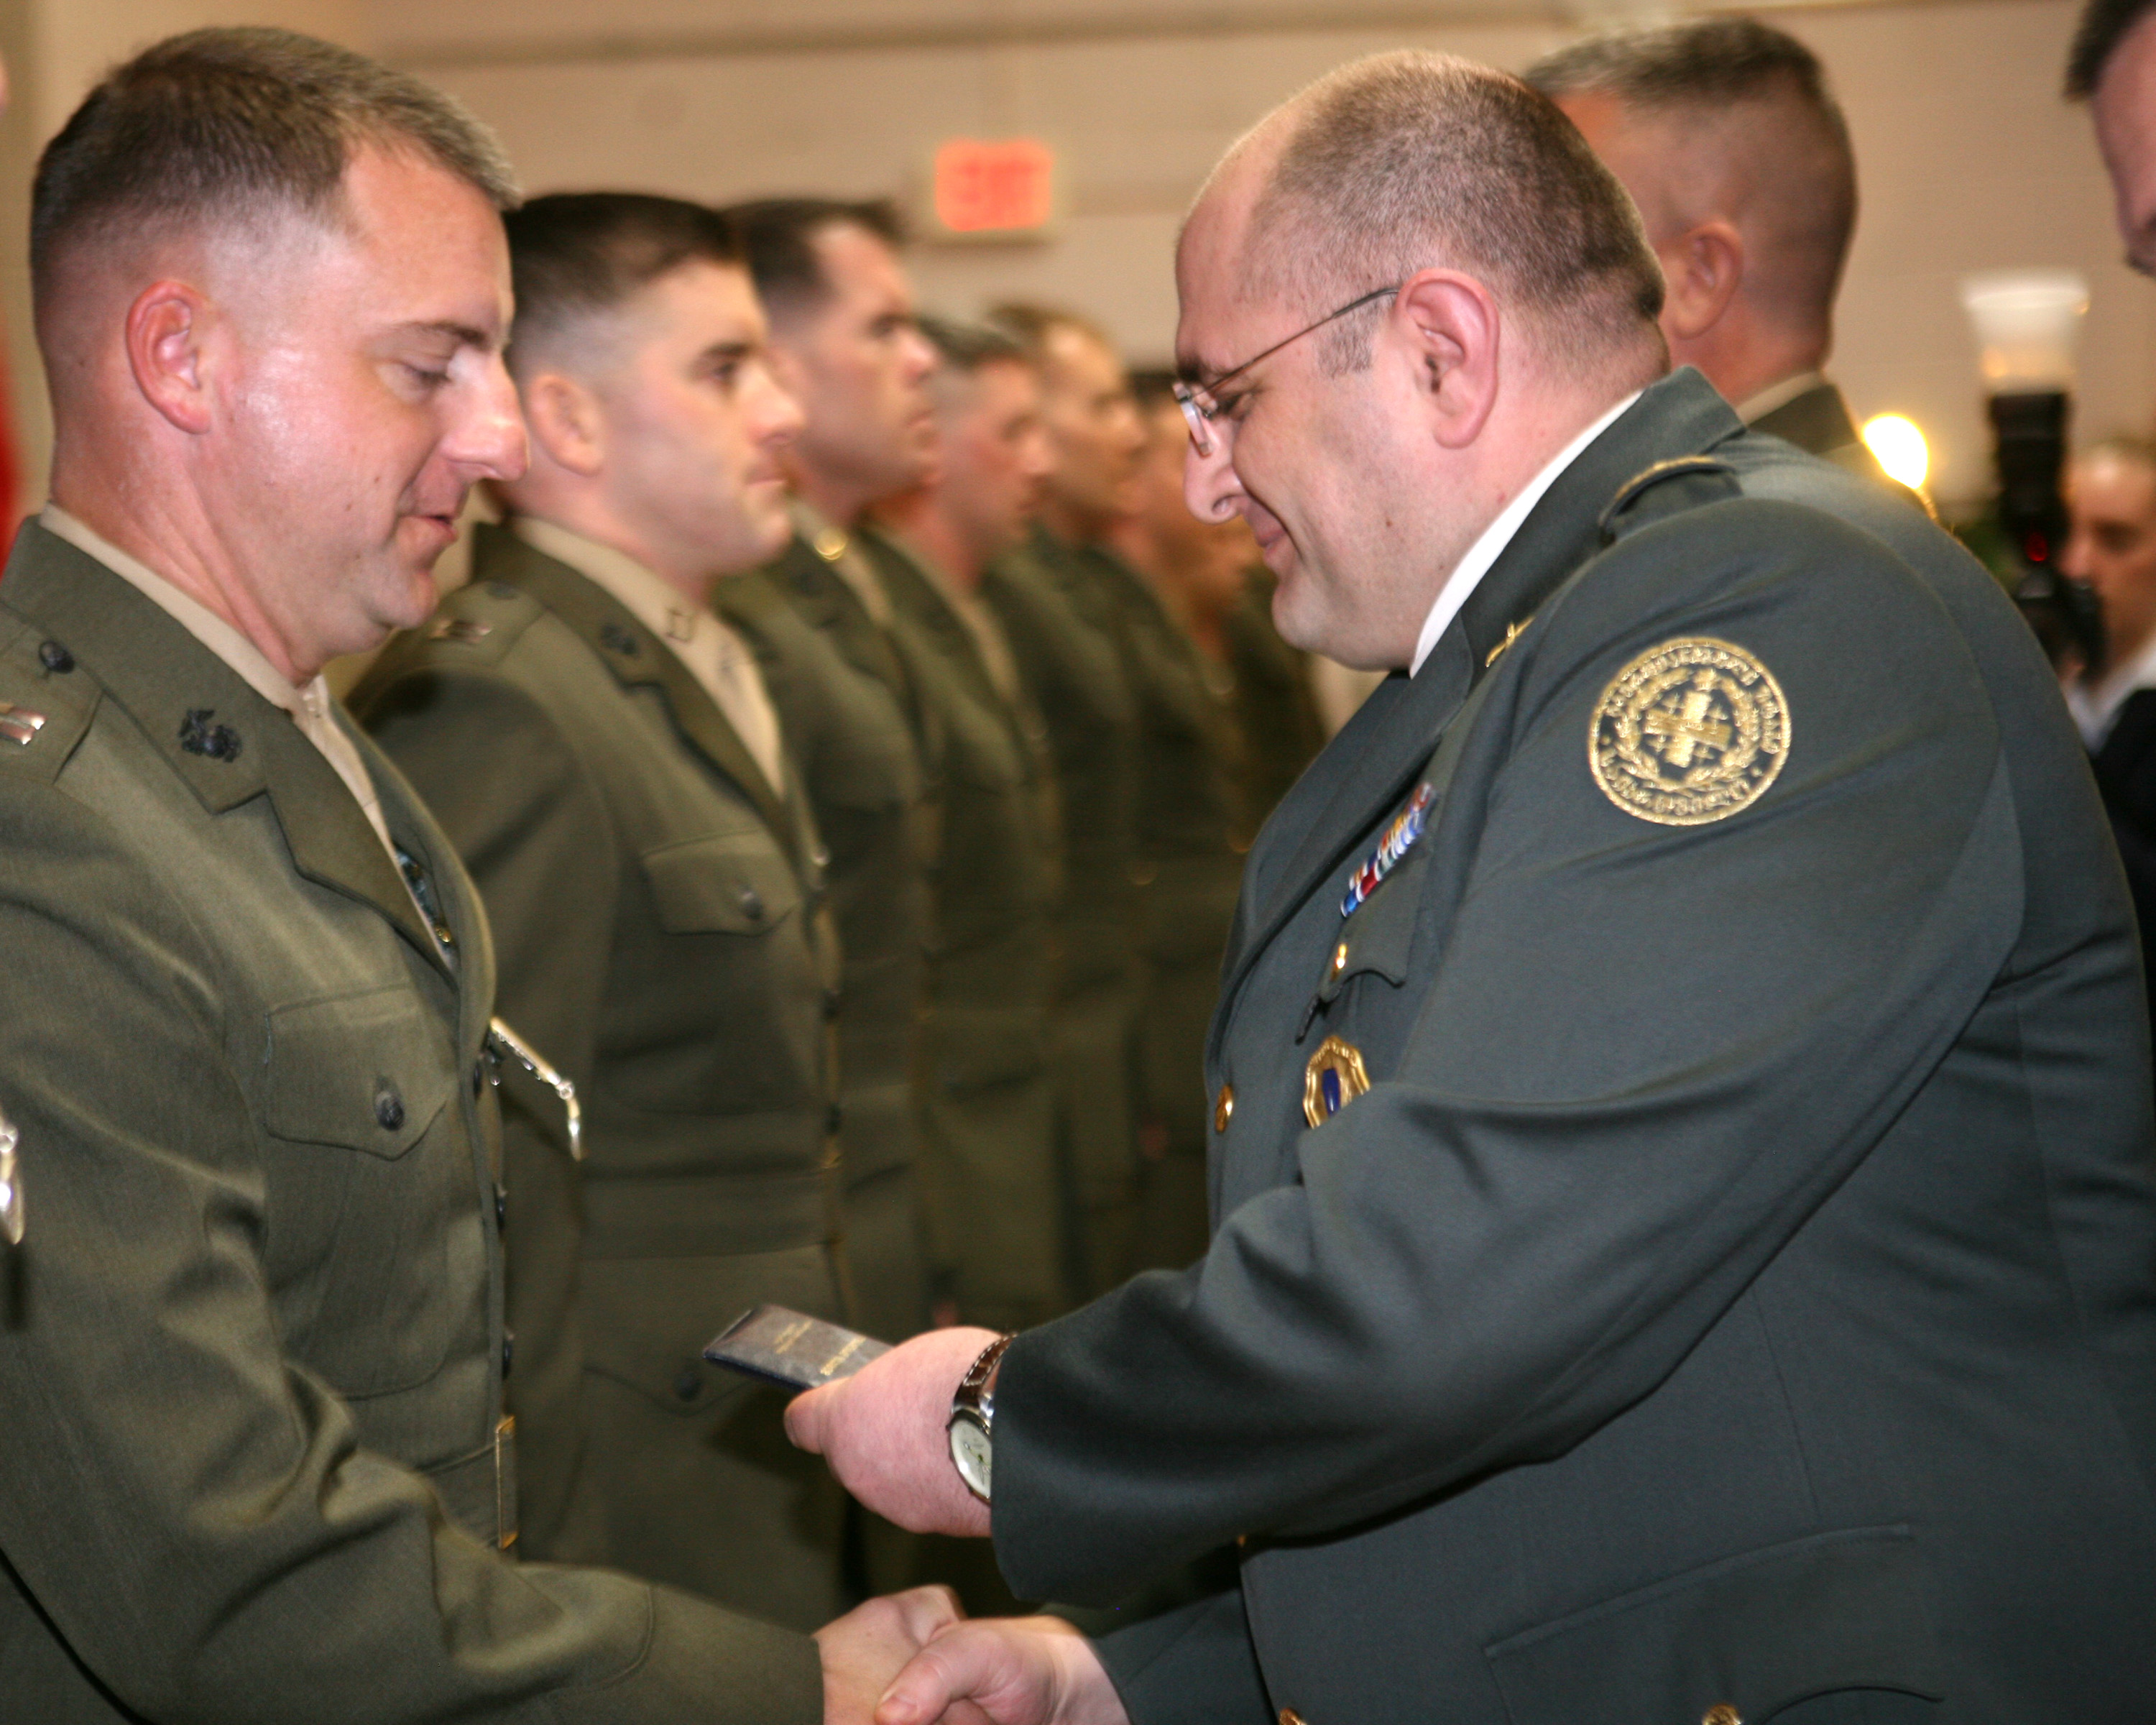 Republic of MOD, ACMC Recognize Marines and Sailor for GDPISAF